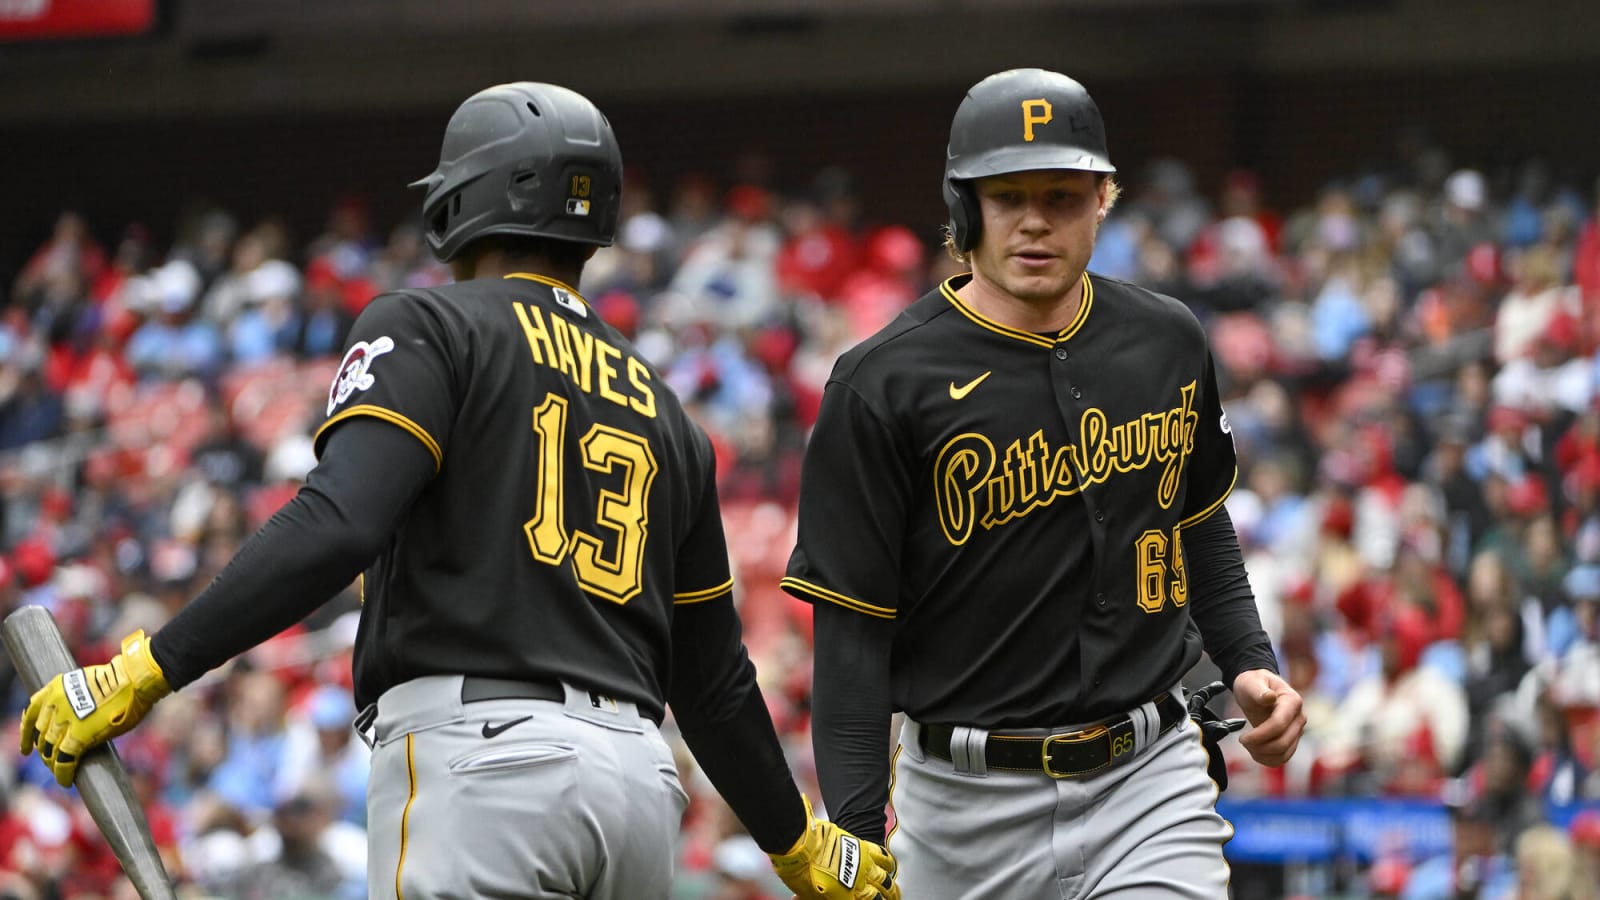 Pirates Fall to Cardinals 5-4 after Edman Walk-off  in Extras; Spilt Series